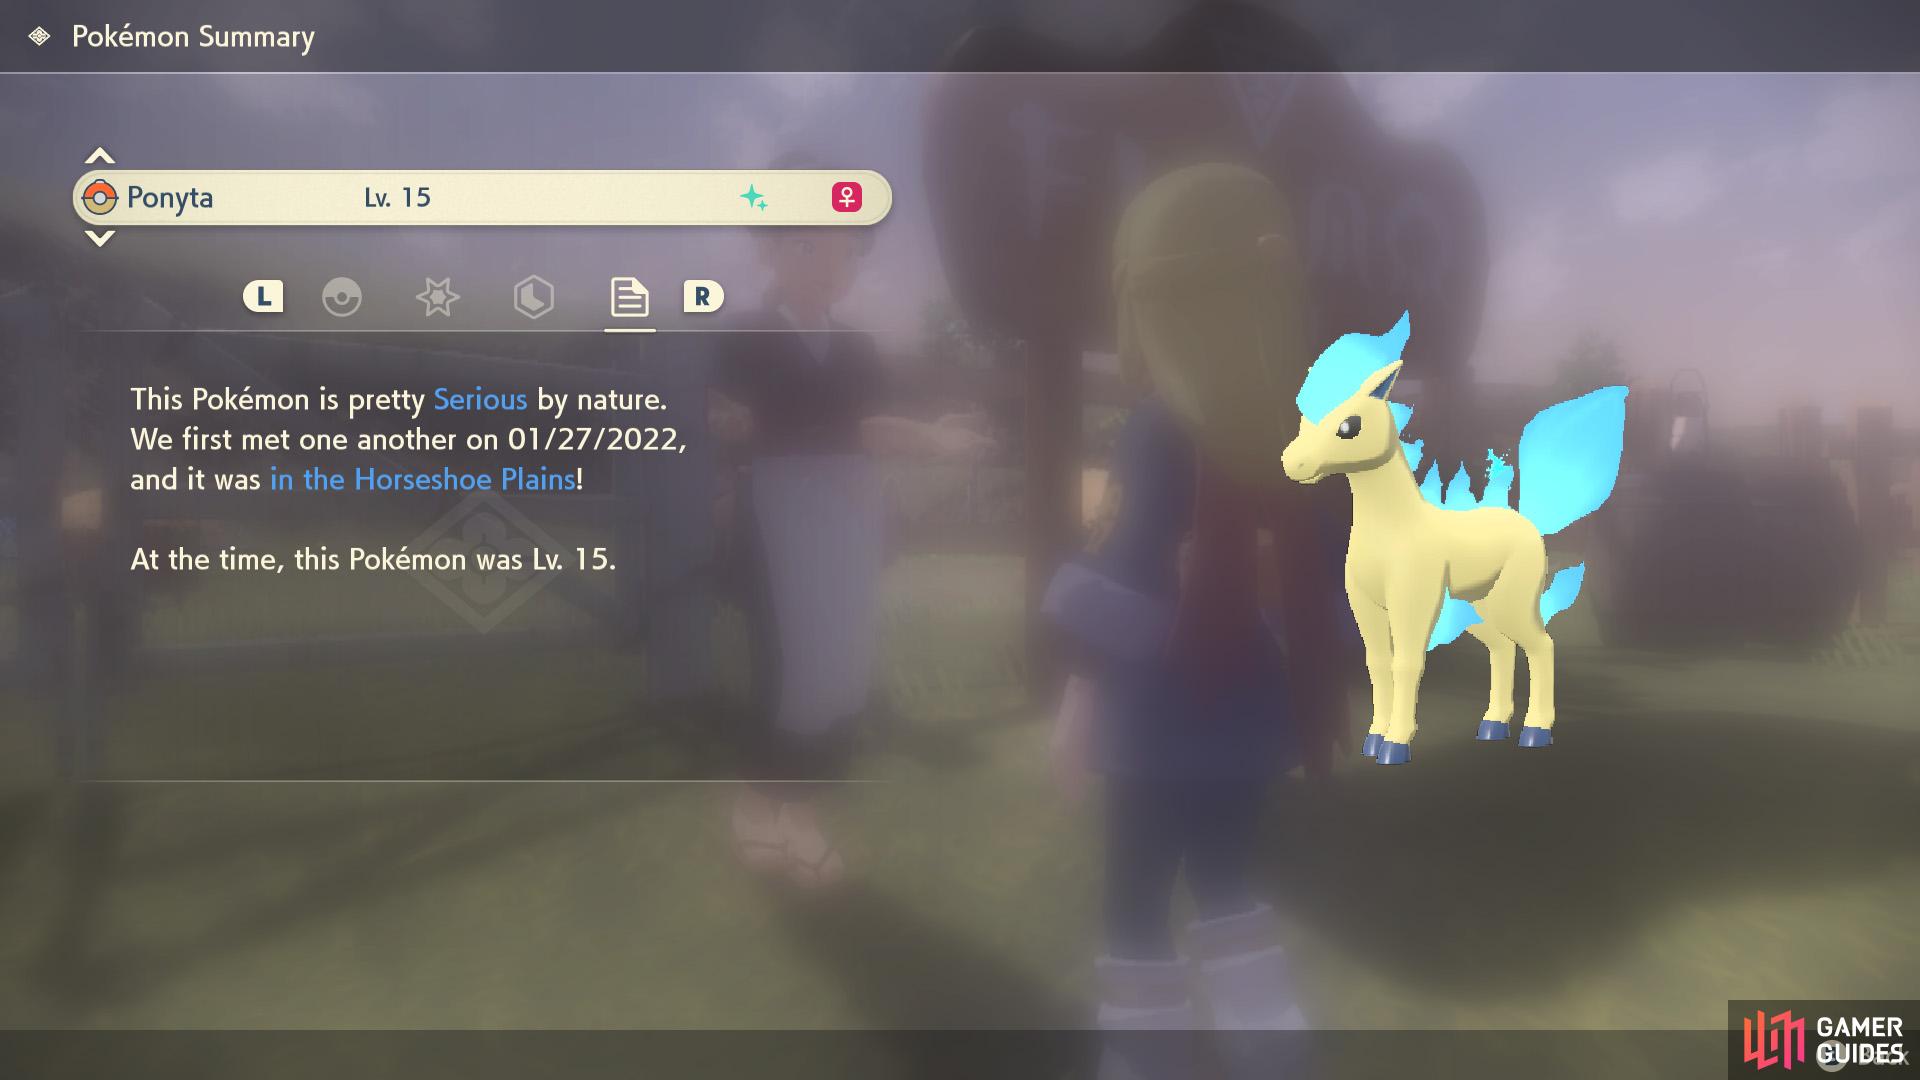 Also, he's not cruel enough to take your shiny Ponyta.